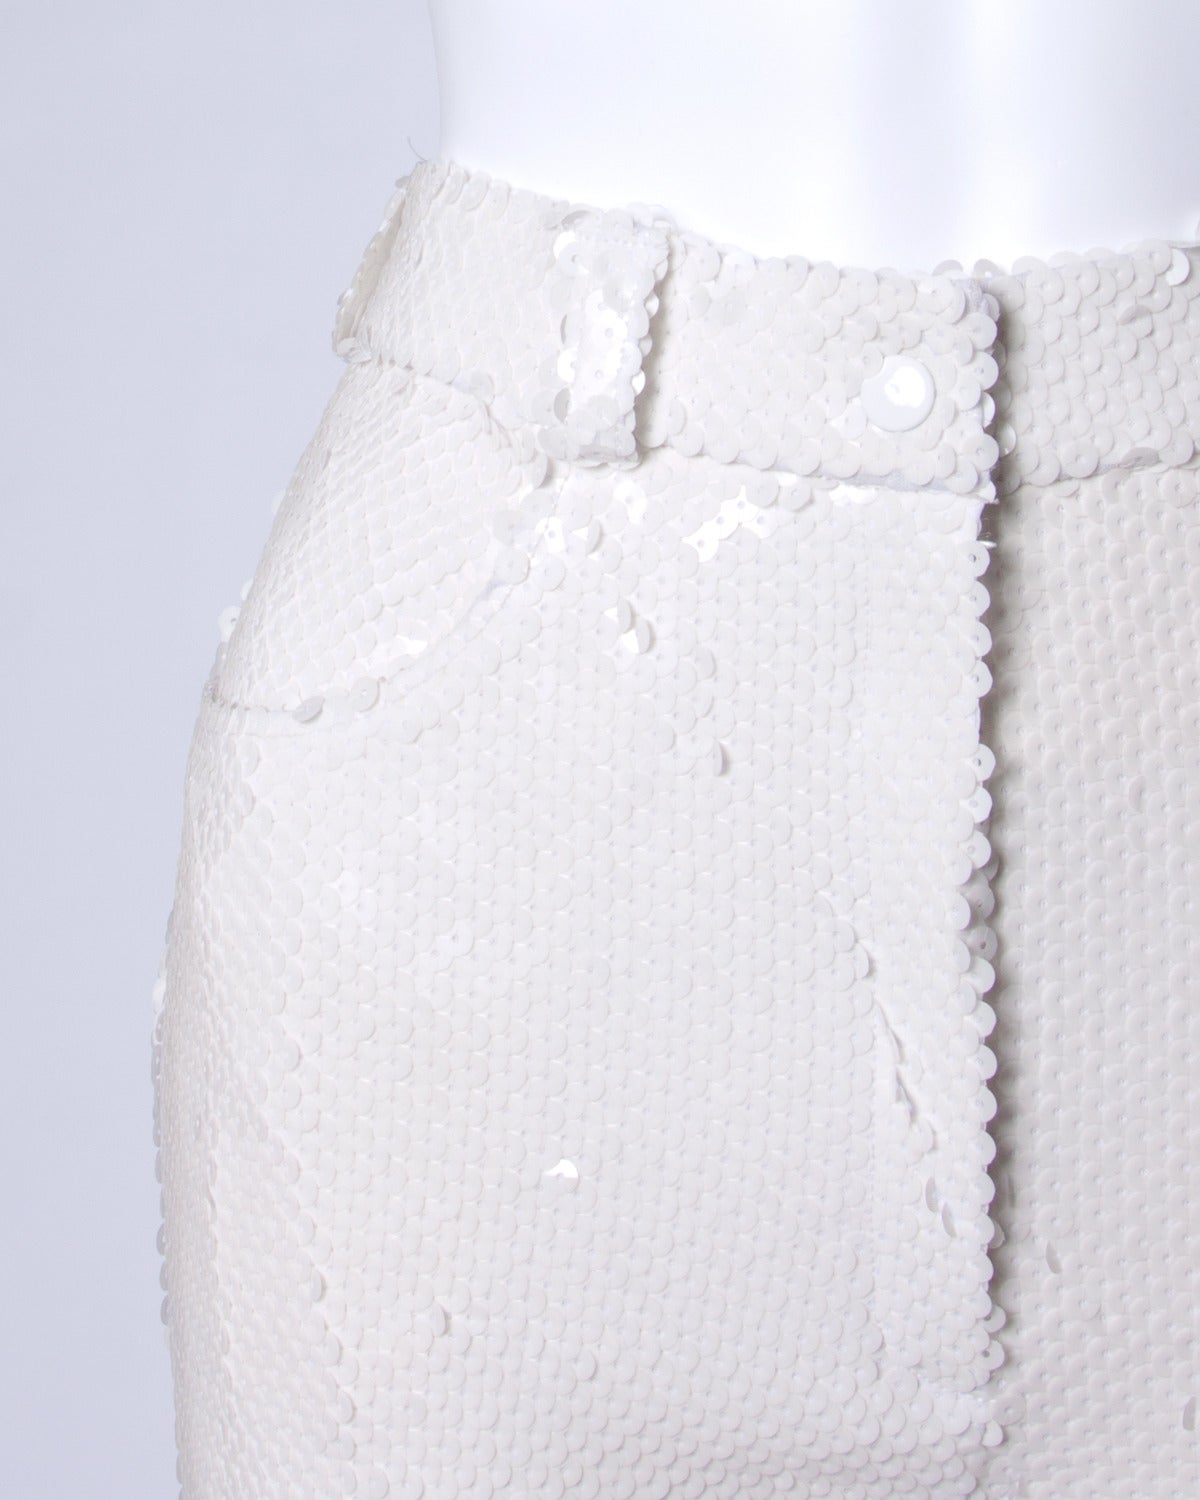 Jaw dropping vintage white sequin pants by Jeanette for St. Martin.

Details:

Fully Lined
Back Pockets
Front Pockets
Front Zip and Snap Closure
Marked Size: 10
Estimated Size: Medium
Color: White
Fabric: Sequins
Label: Jeanette for ST.